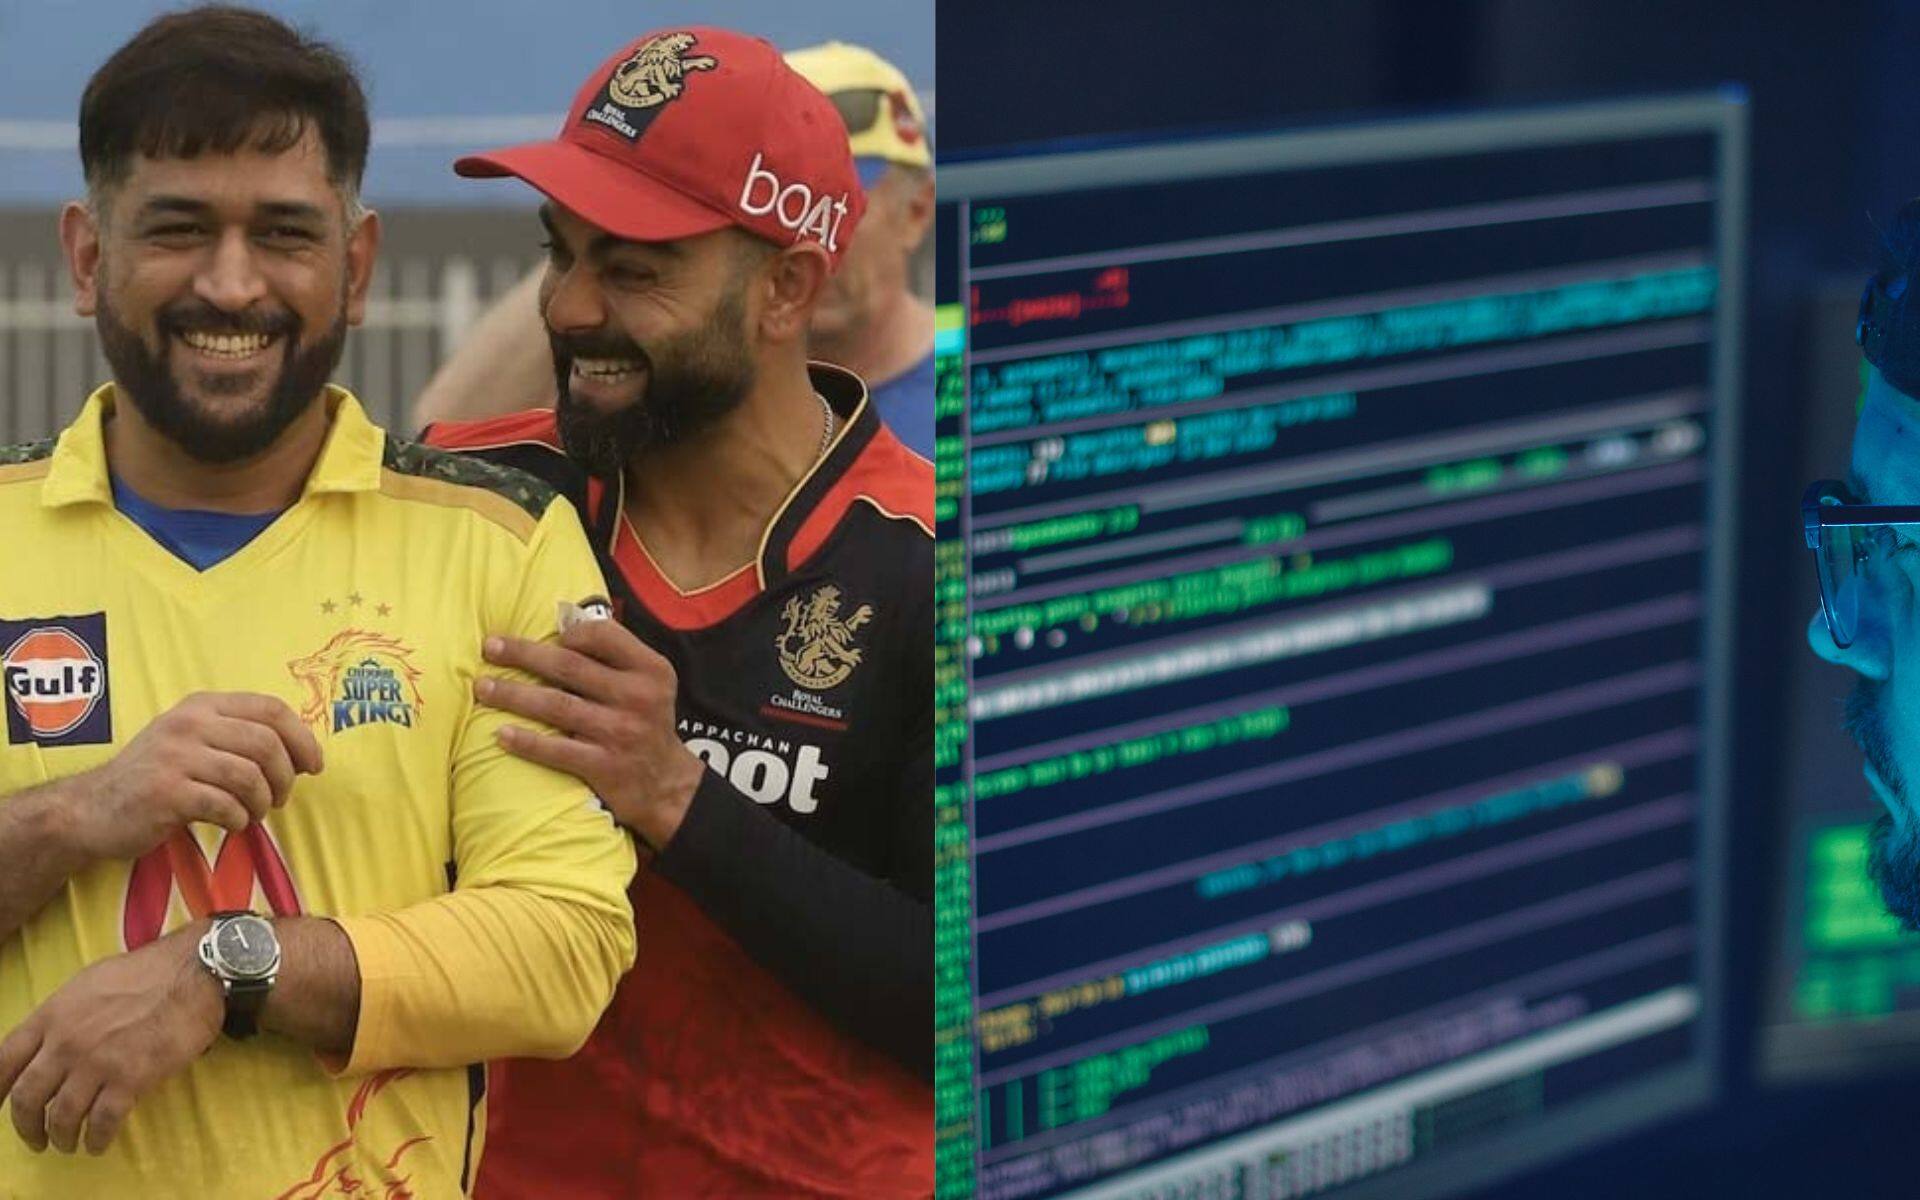 A man has been scammed online for RCB vs CSK game(X.com)
